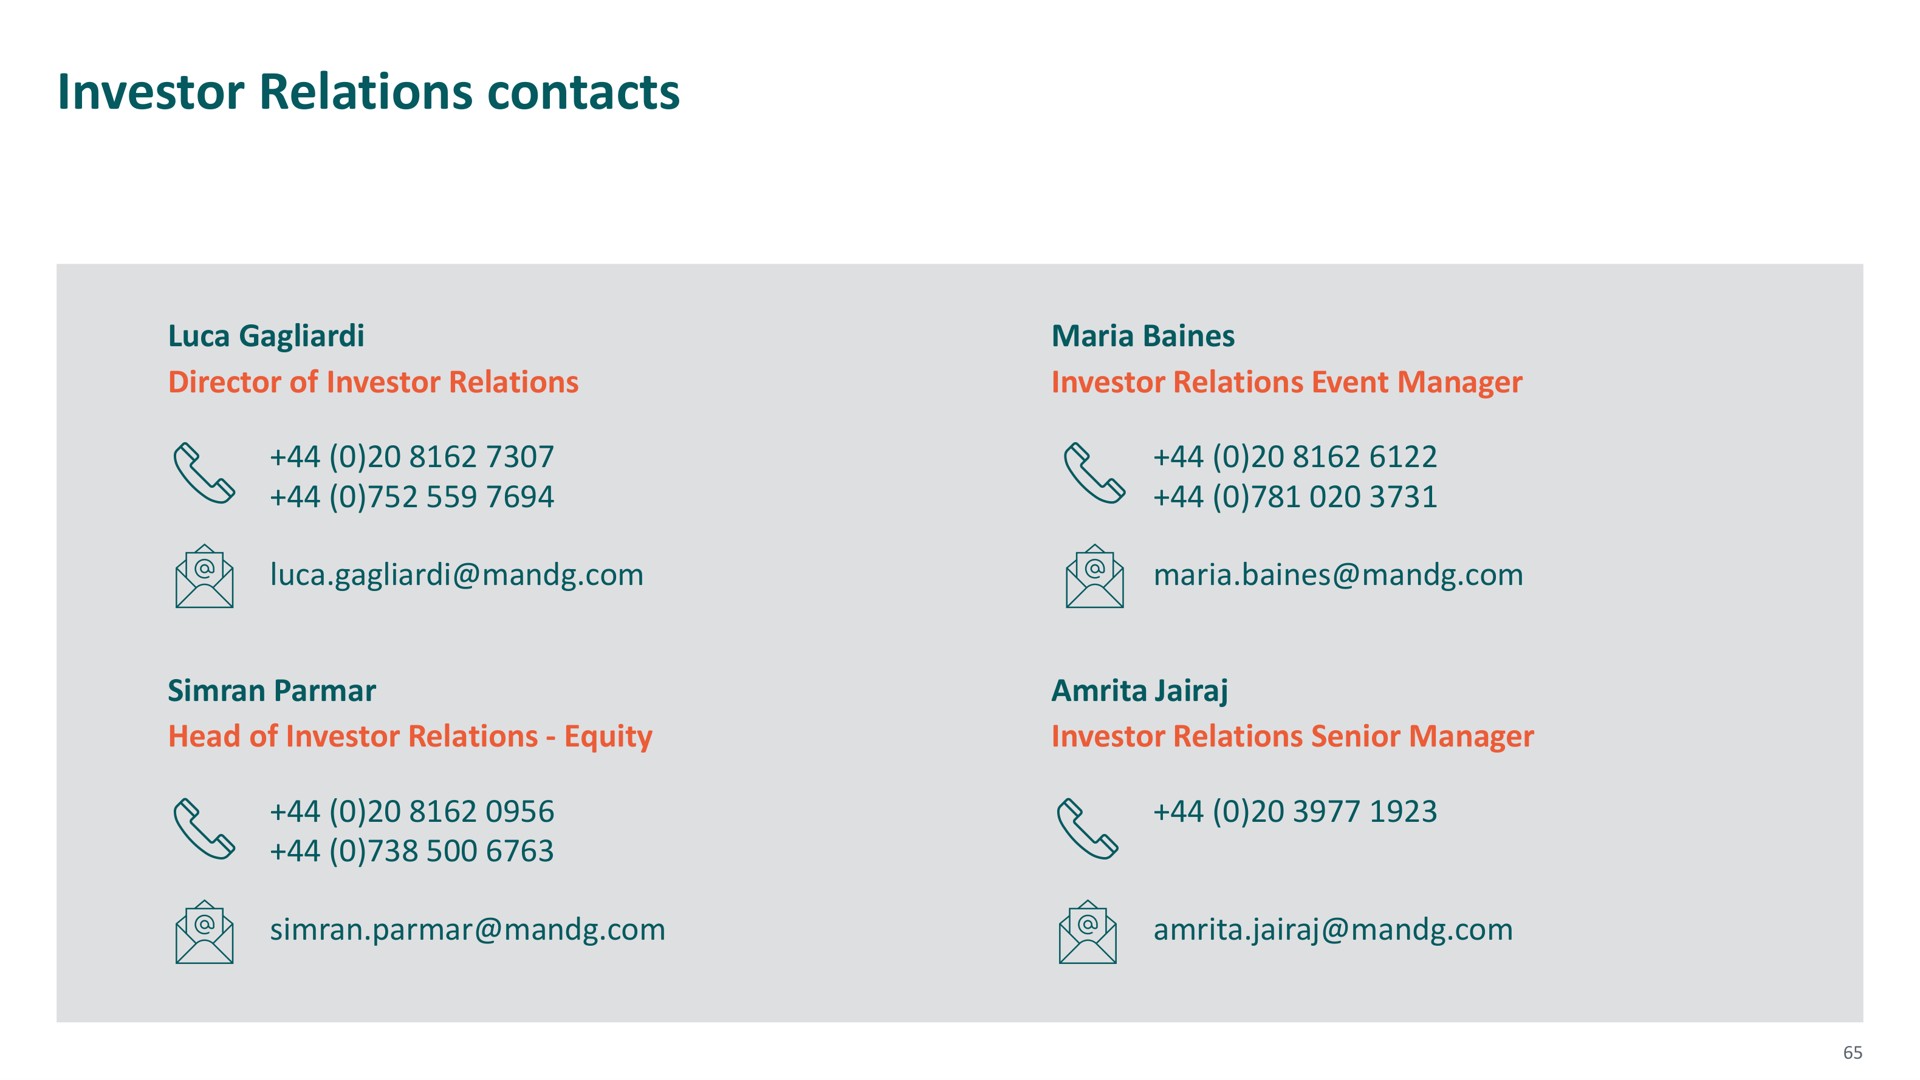 investor relations contacts | M&G